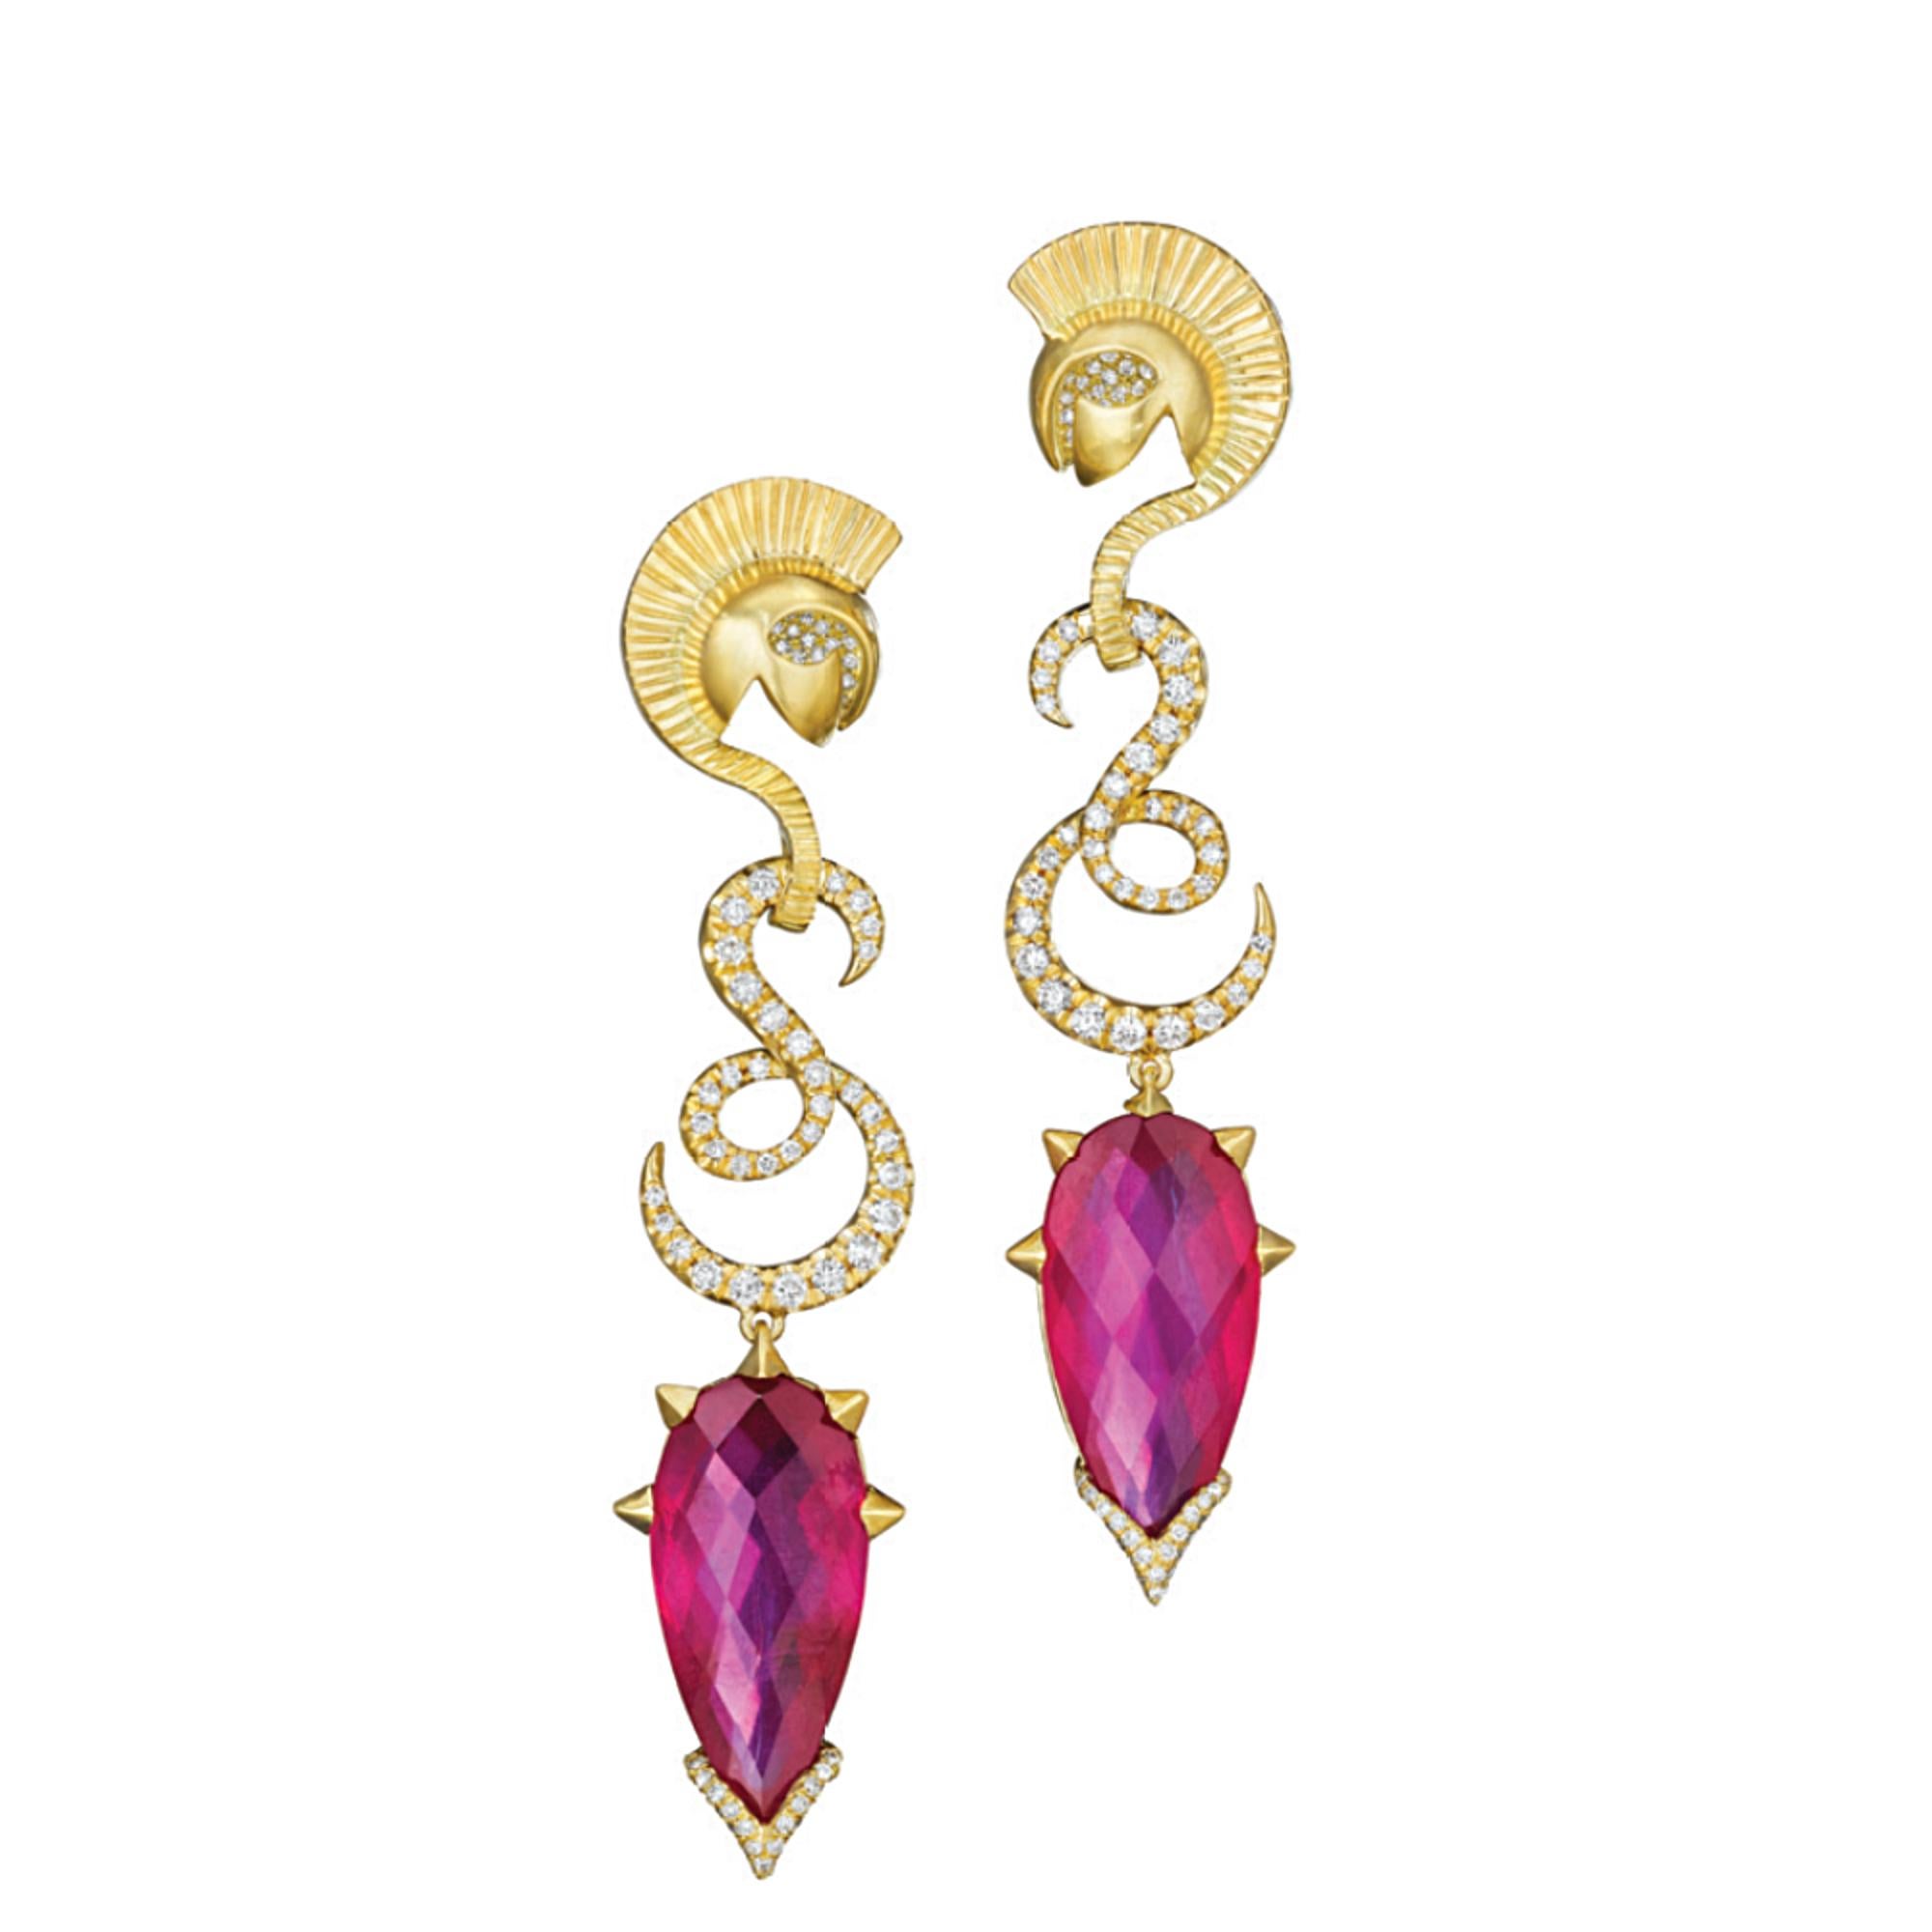 Specs:  18k yellow gold earrings with 19.75 carats of  Rhodolite garnet and .79 carats Diamond. 

Story:  These earrings replicate armor, protection as if going into battle. 

Ares is the god of war, one of the Twelve Olympian gods and the son of